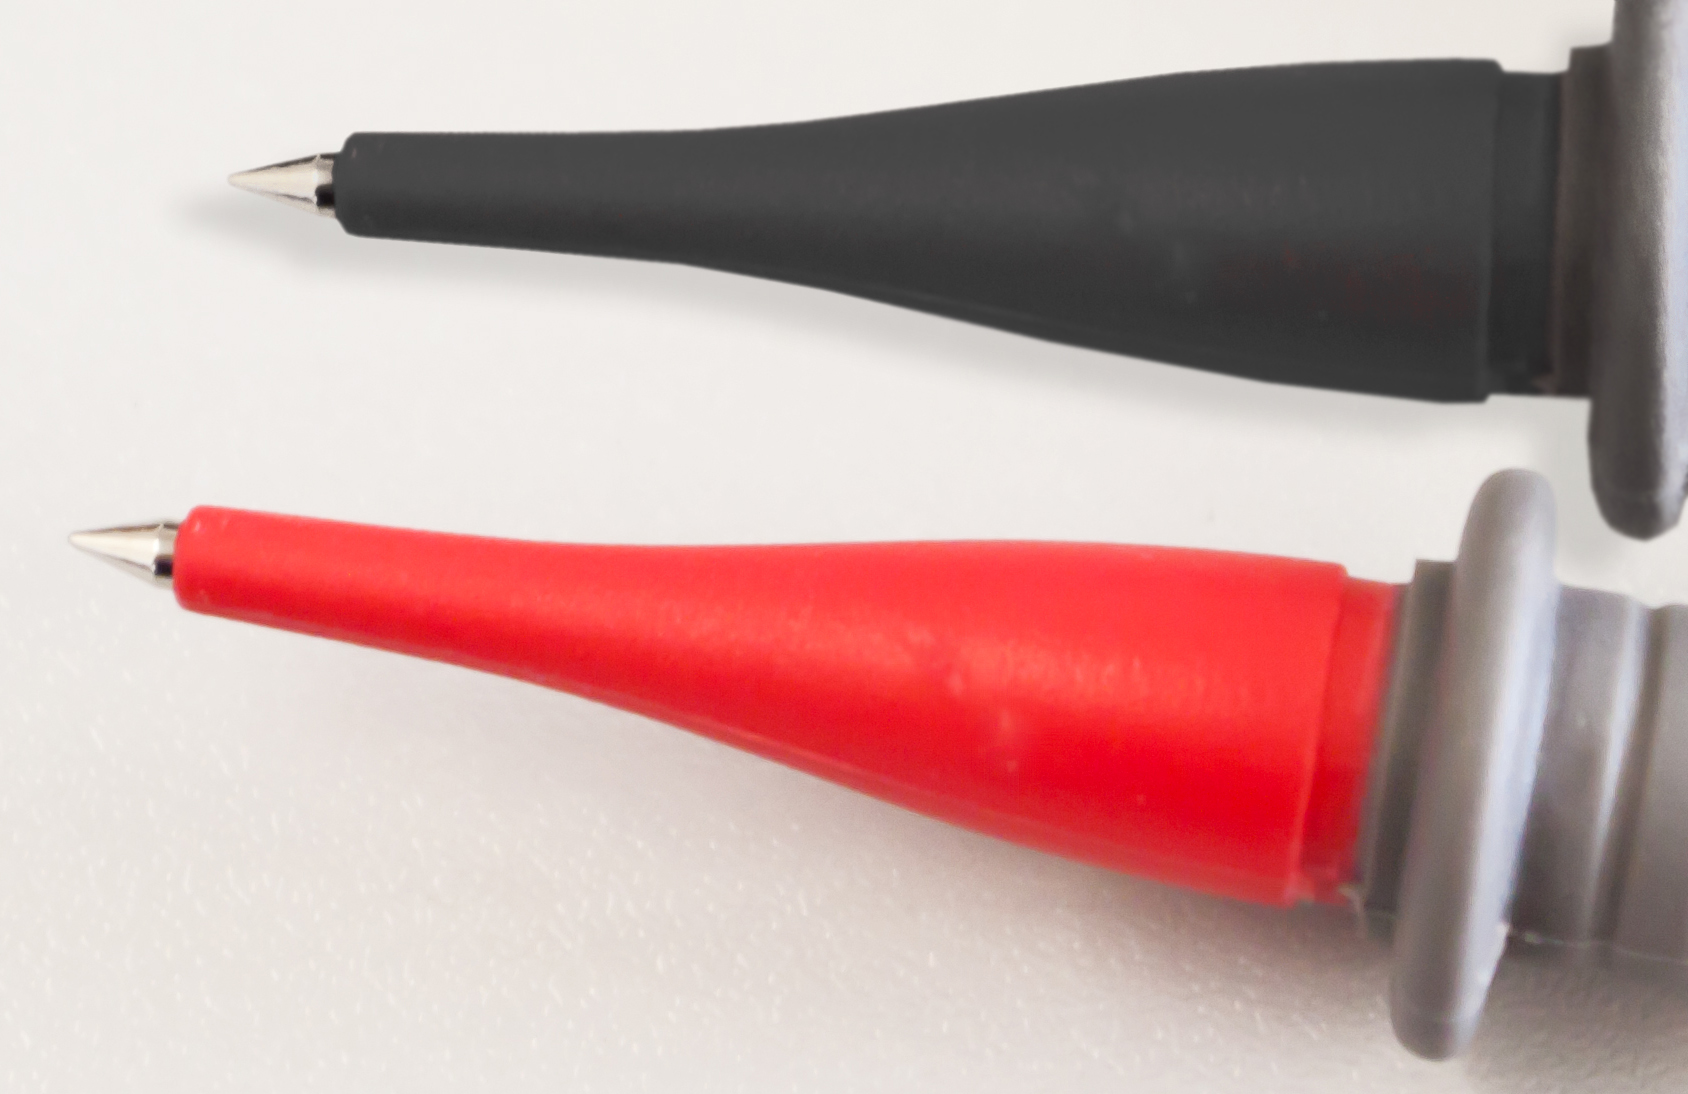 «PeakTech® TKS-2» Test Leads with 2 mm probe tip